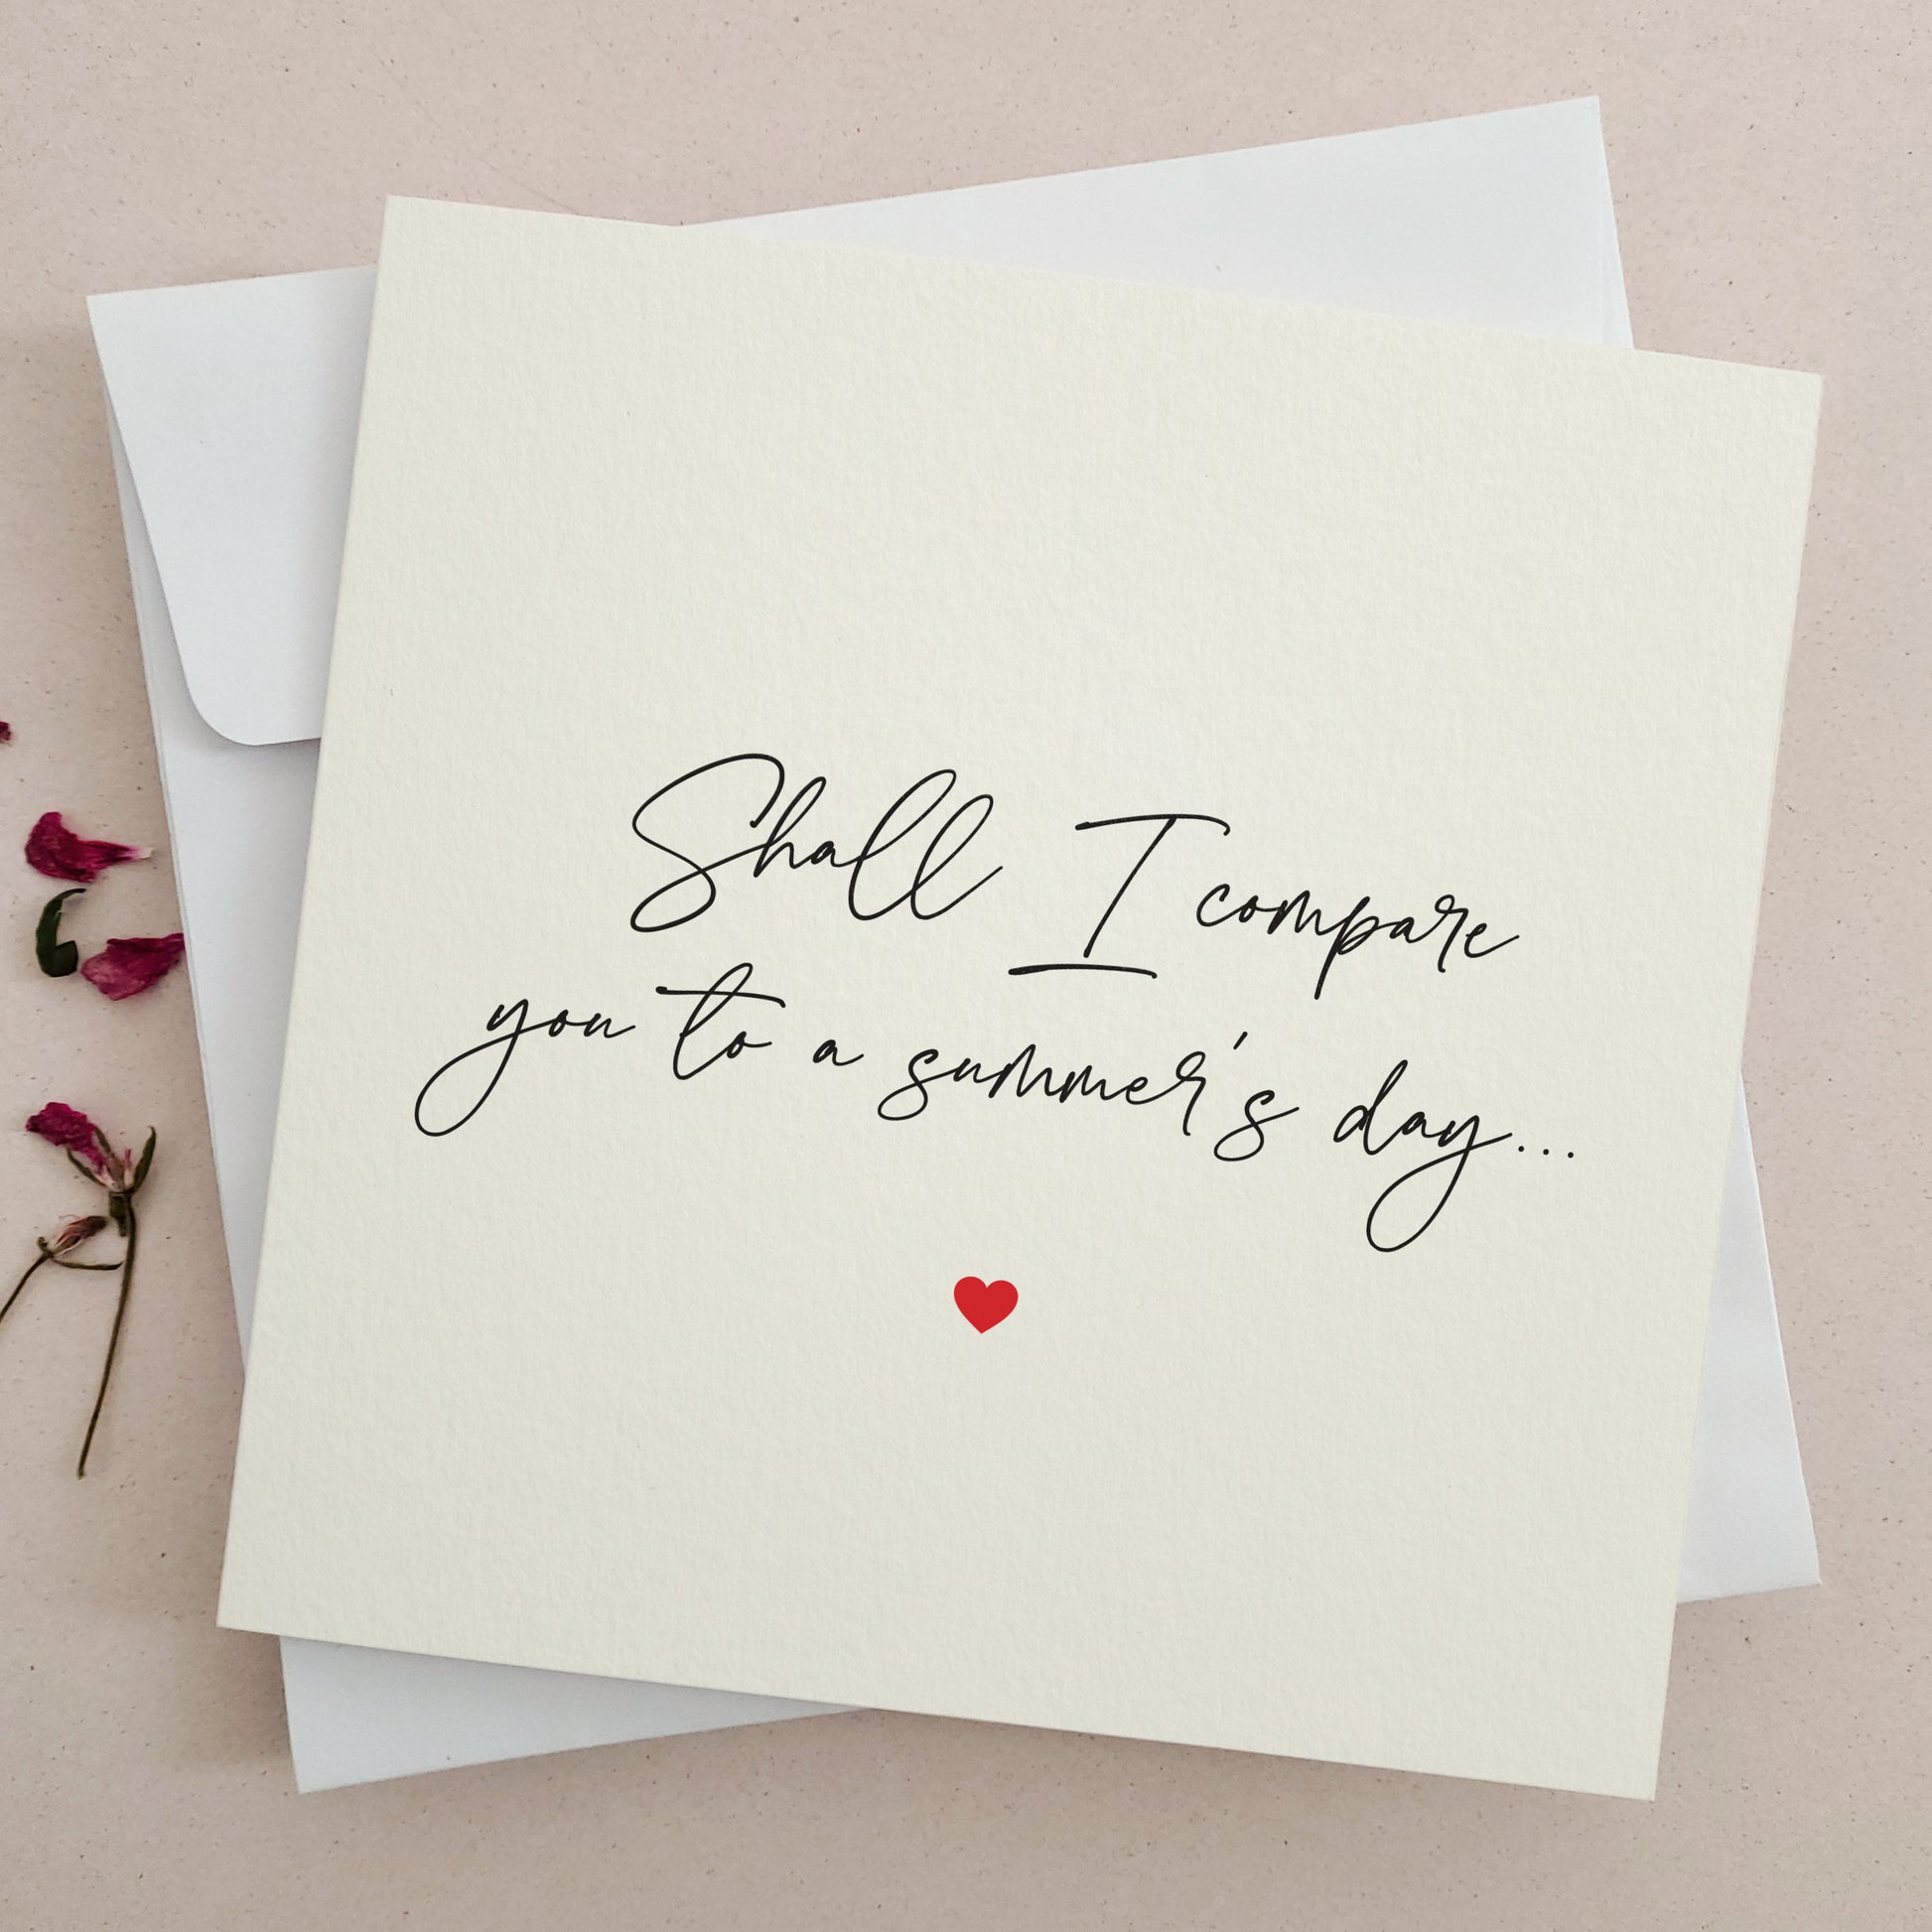 poetic valentines day card personalized with name - XOXOKristen